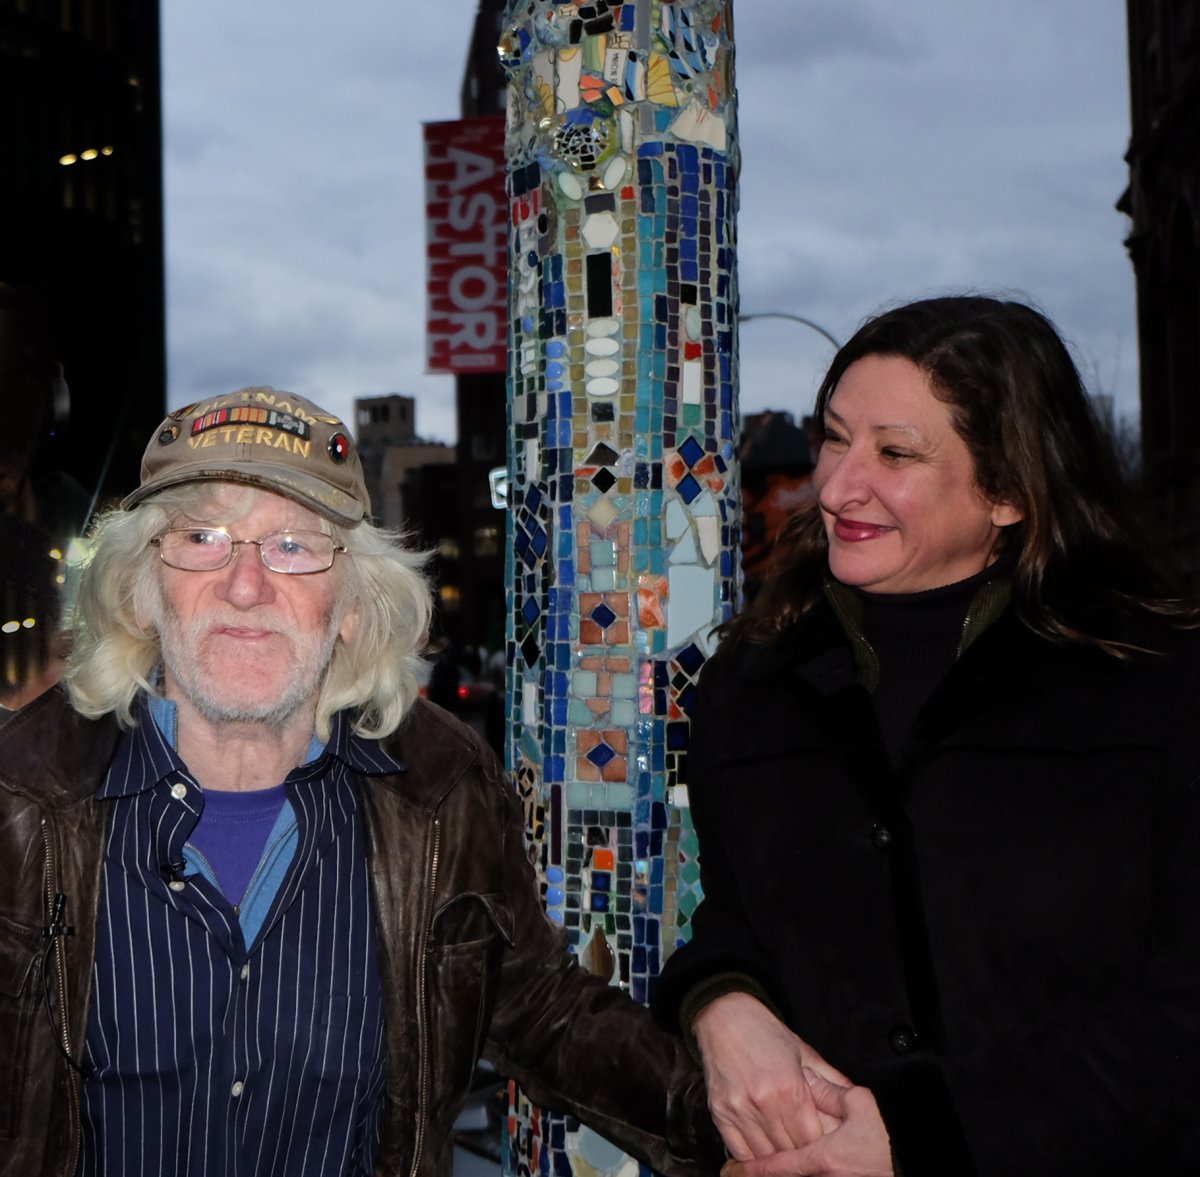 What a team! Jim Power and Julie Powell in front of one of Power’s restored lampposts on Astor Place at the unveiling ceremony earlier this month. Power said Powell, the daughter of a Marine, used tough love to keep him going during rough patches. Powell said she had long admired Power’s lampposts and always wanted to work with him. Photo by Tequila Minsky